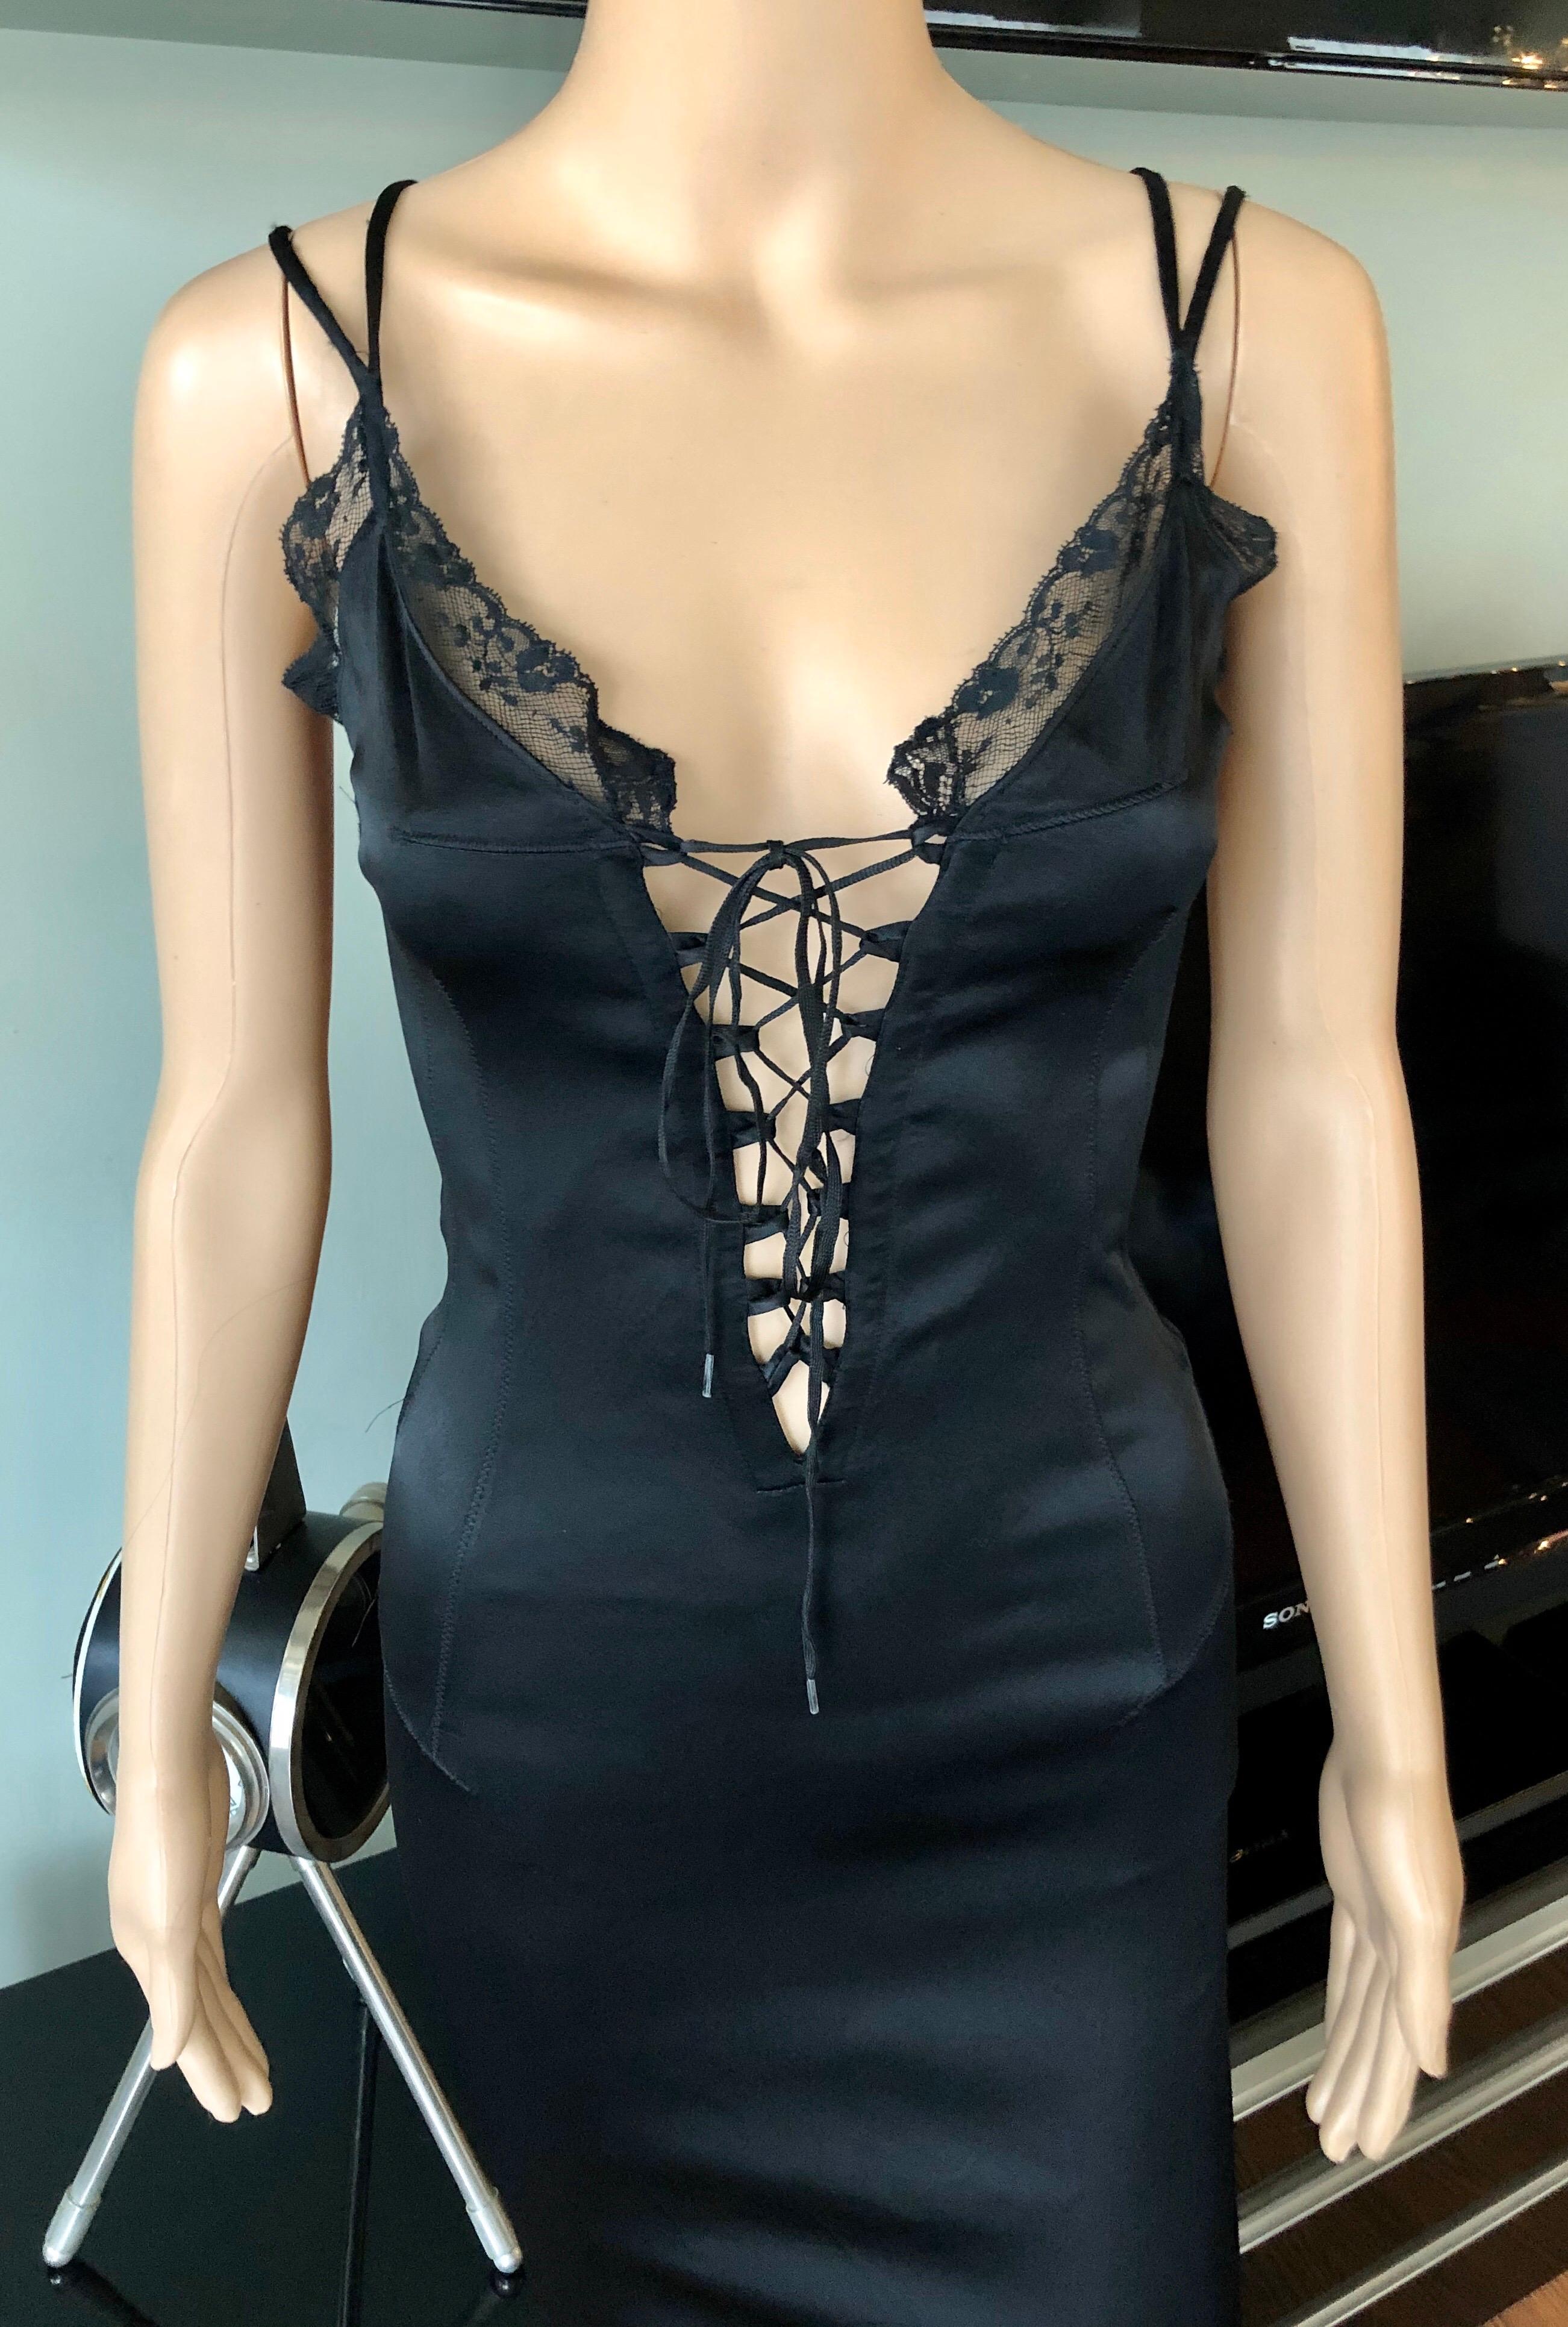 D&G by Dolce & Gabbana c. 2001 Corset Lace Up Black Dress

Please note size and fabric tags are missing. Please find the approximate measurements below:
Chest: 28-34